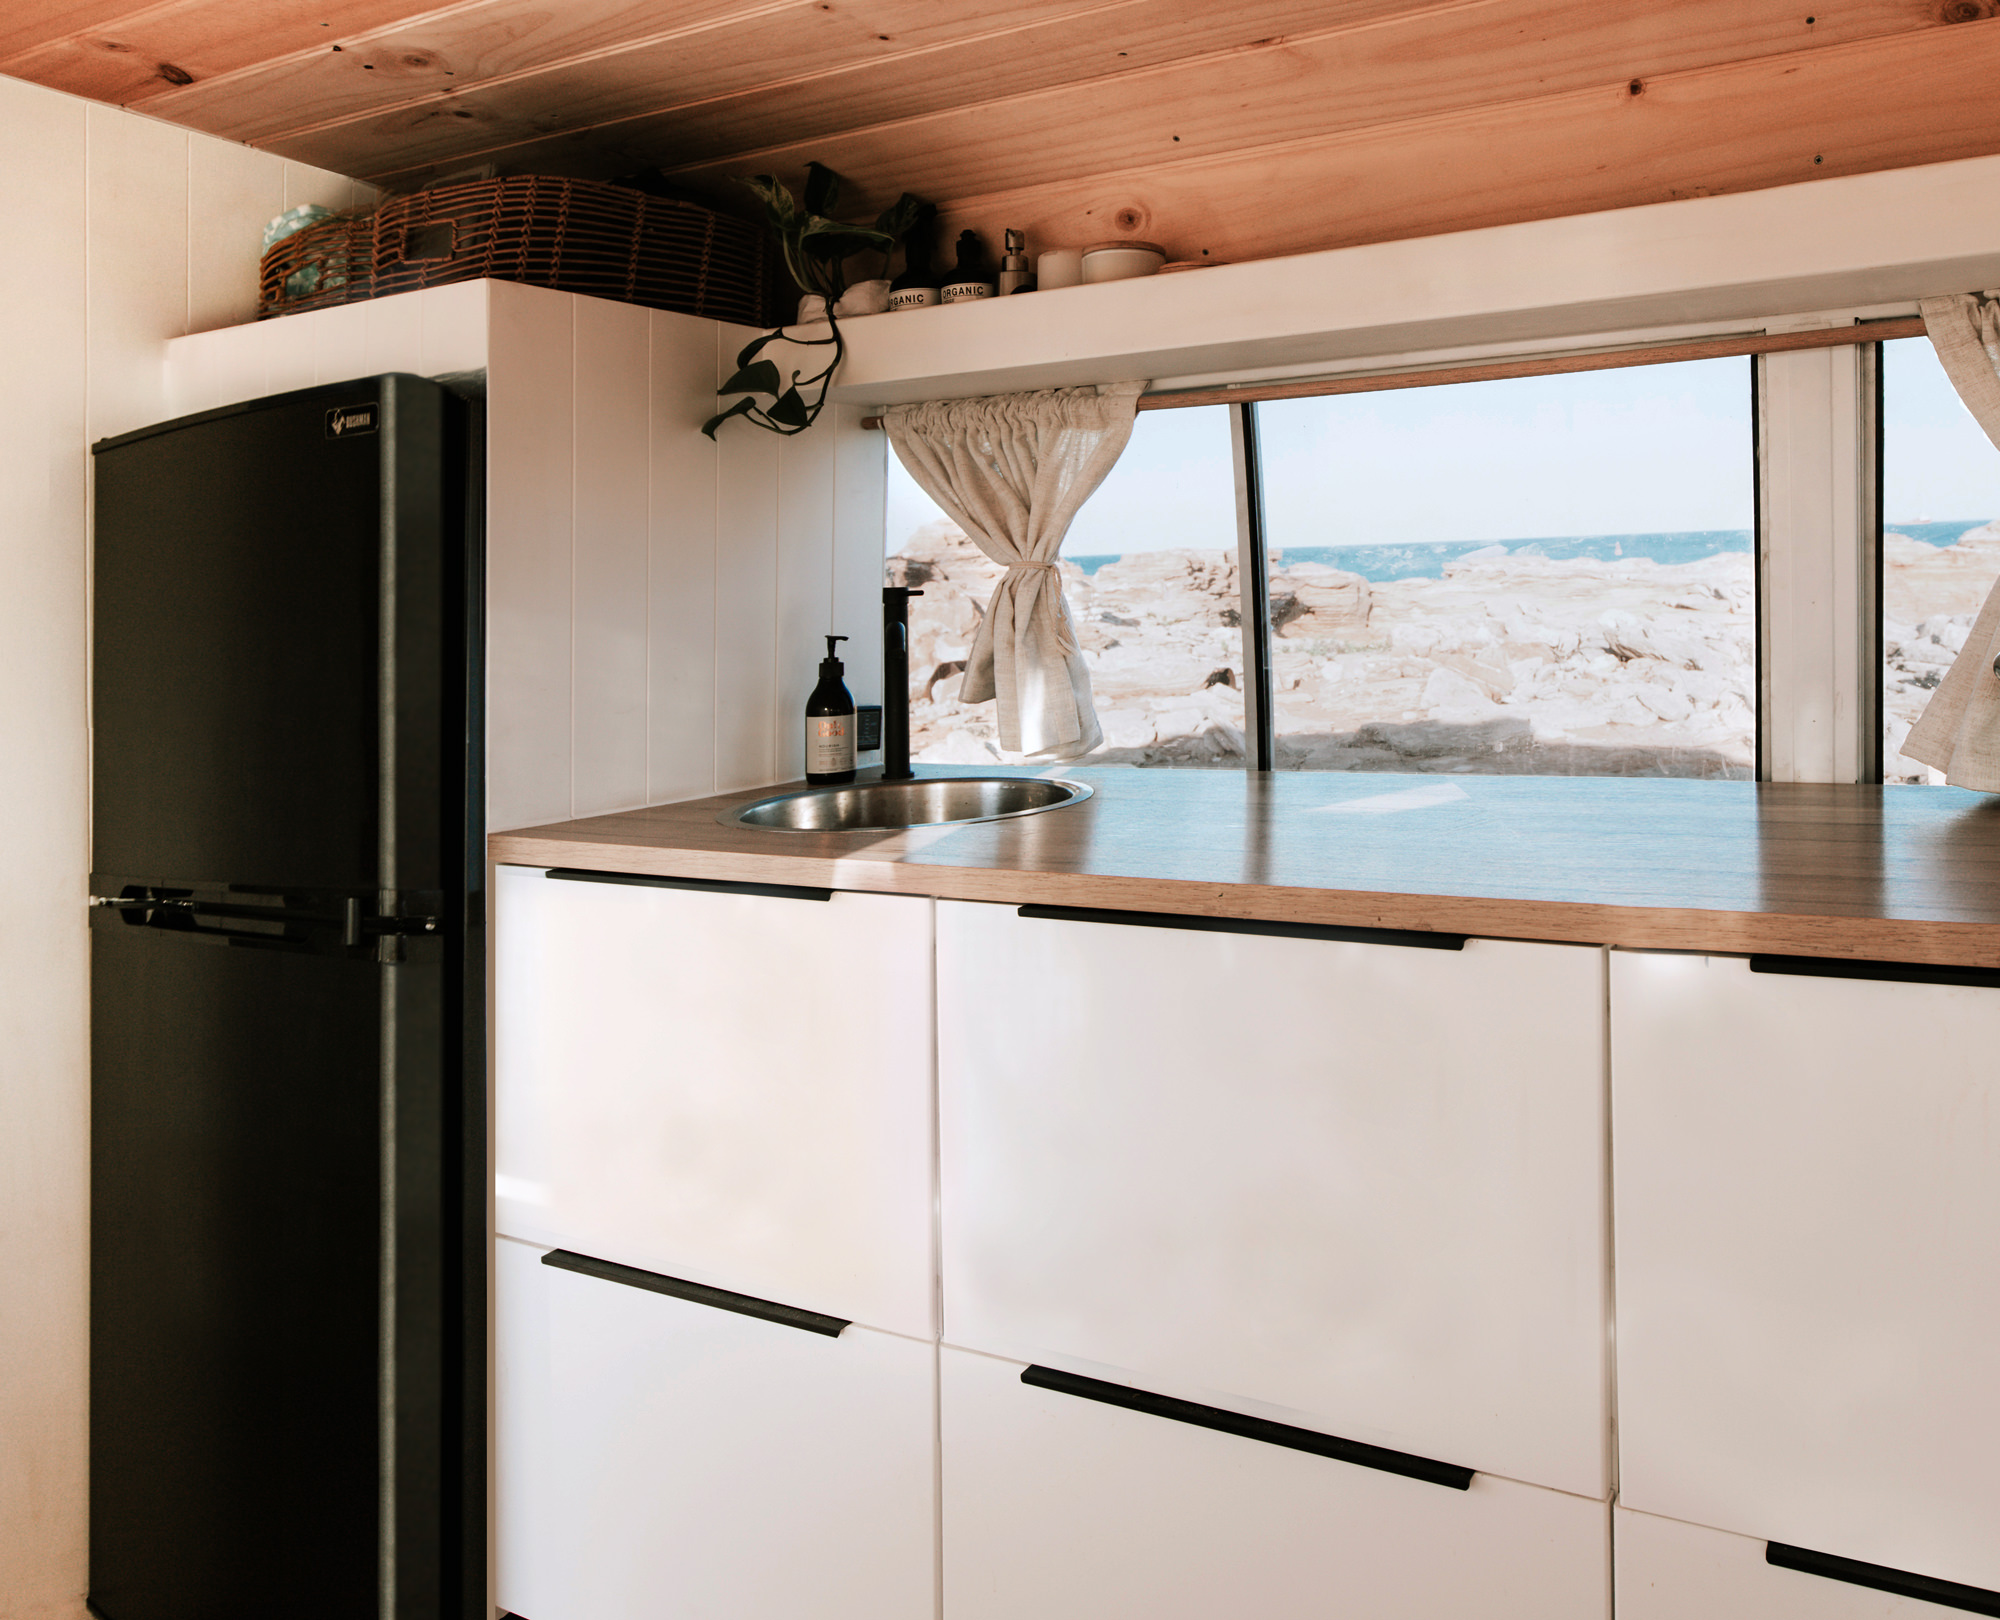 How to Choose Between a Cooler Box & a Refrigerator for Your Caravan